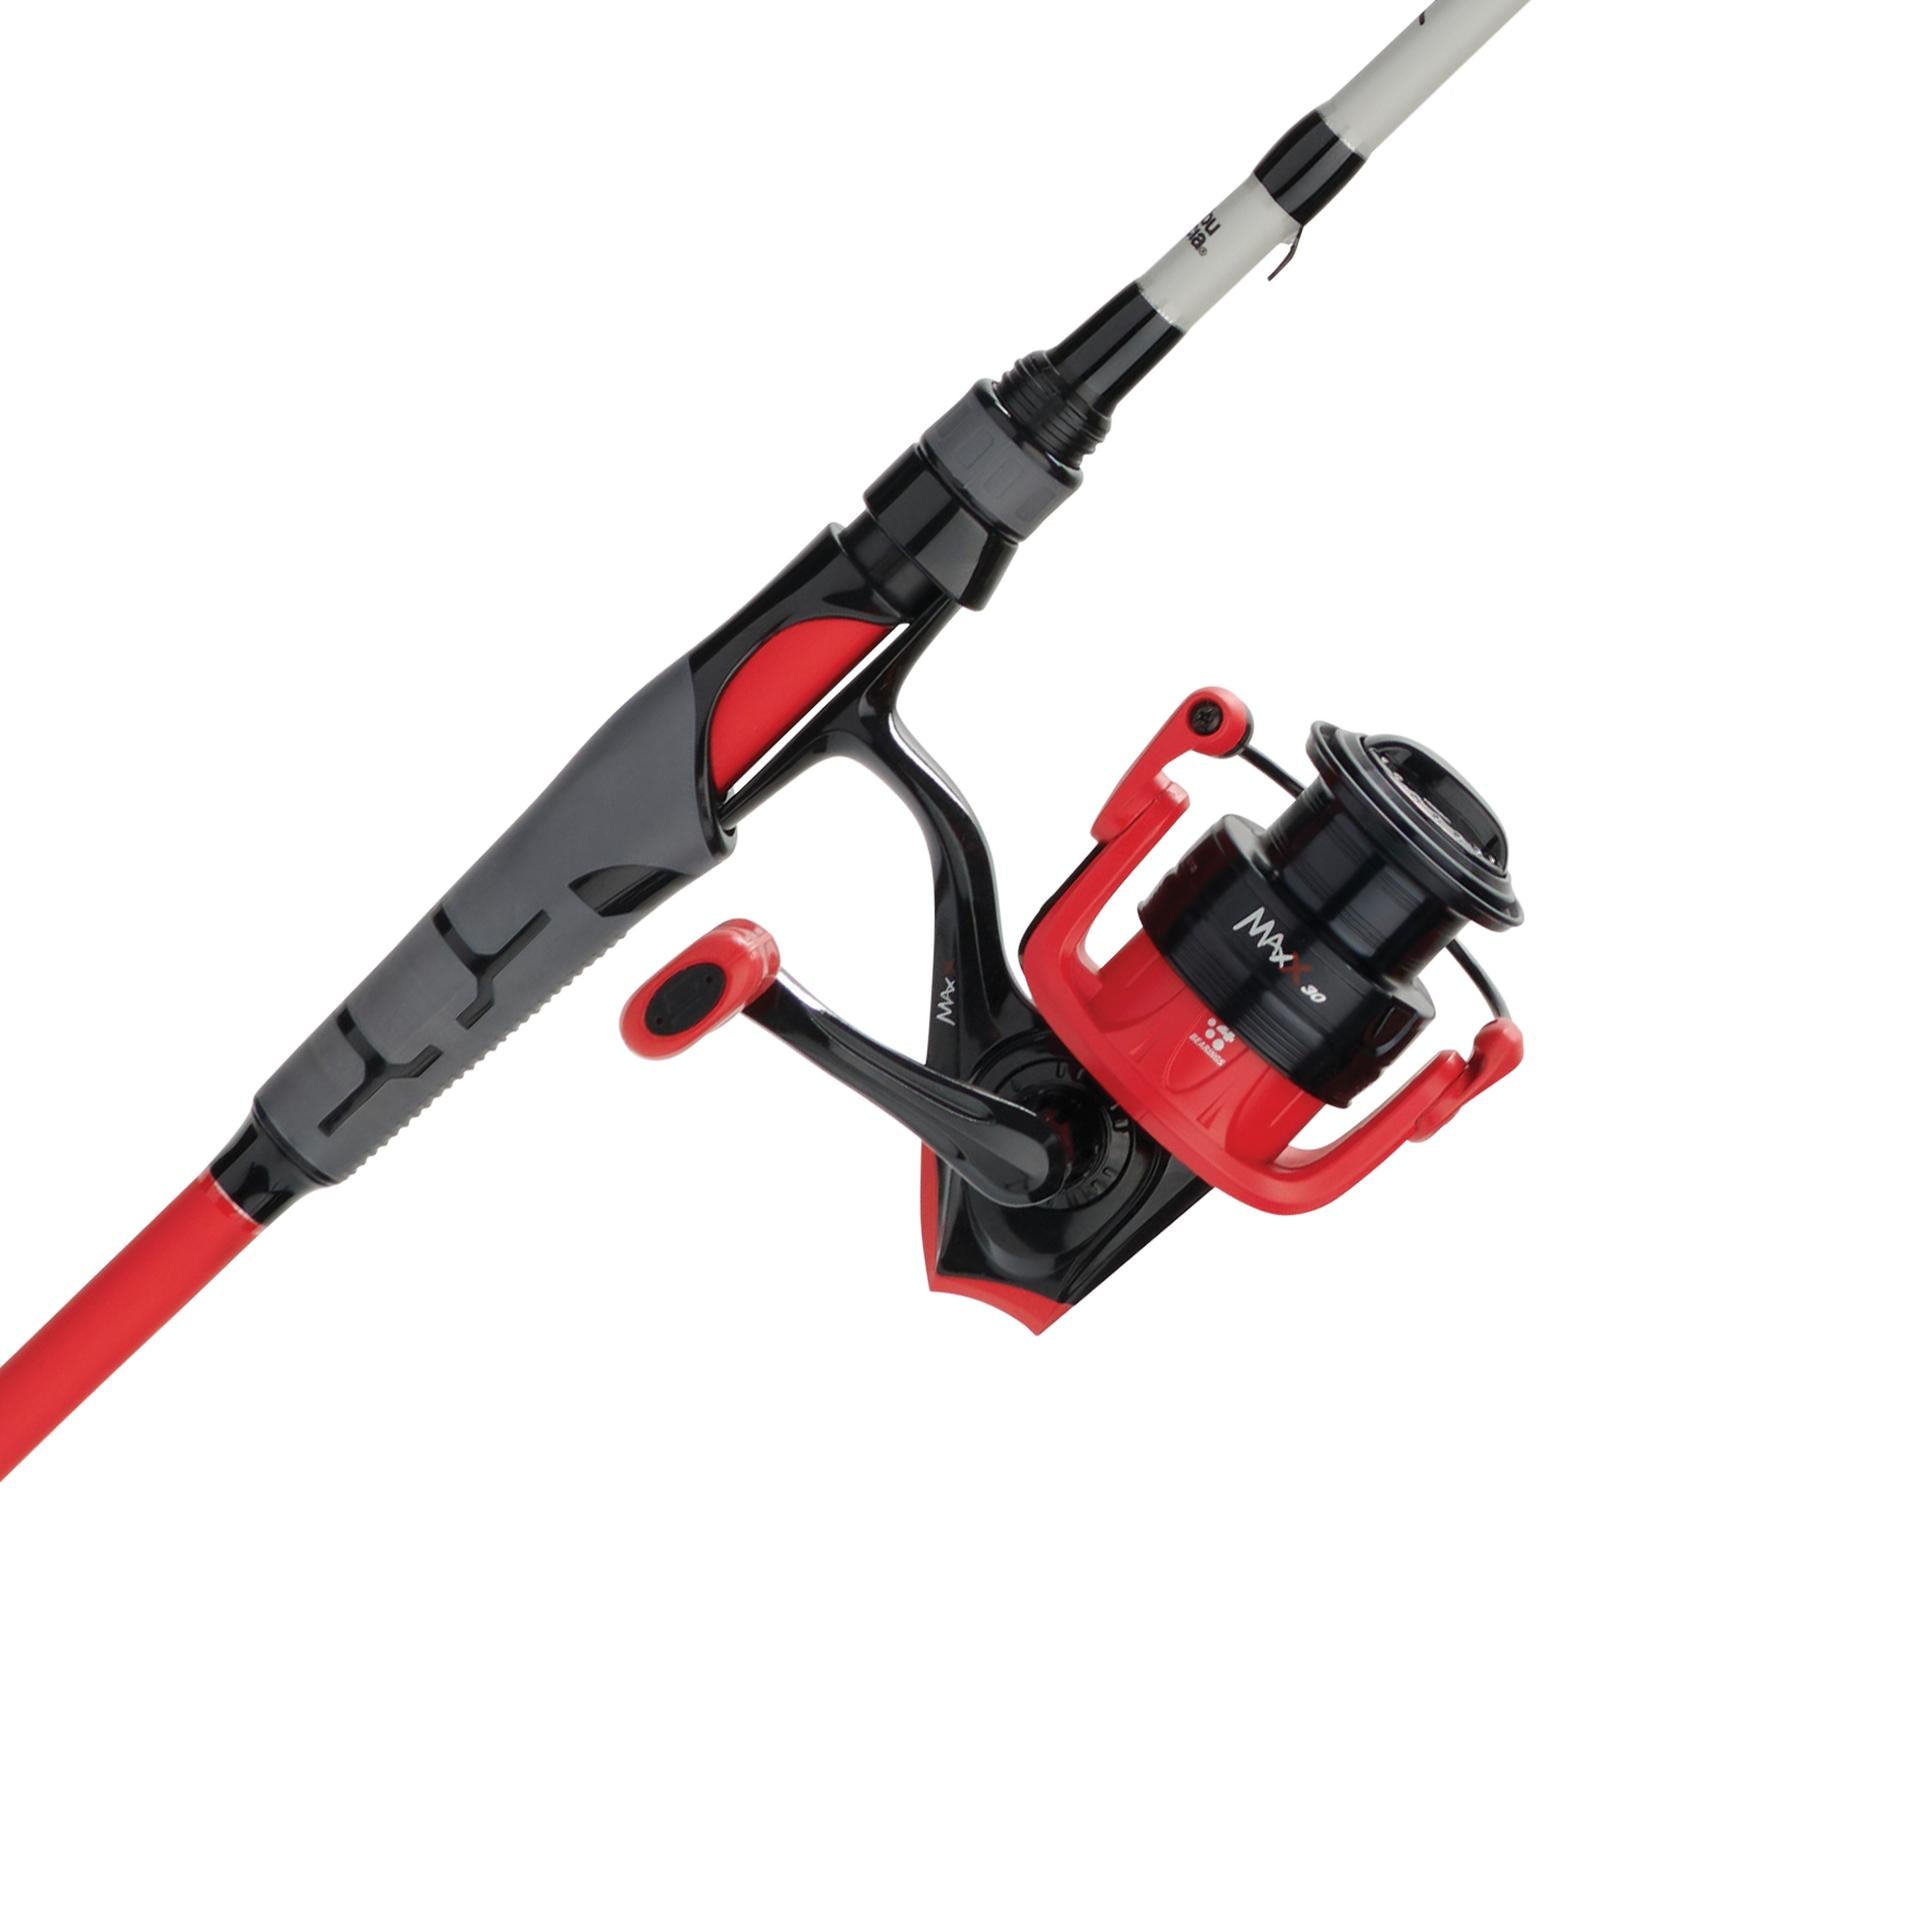 Max® X Spinning Combo with Bait Pack